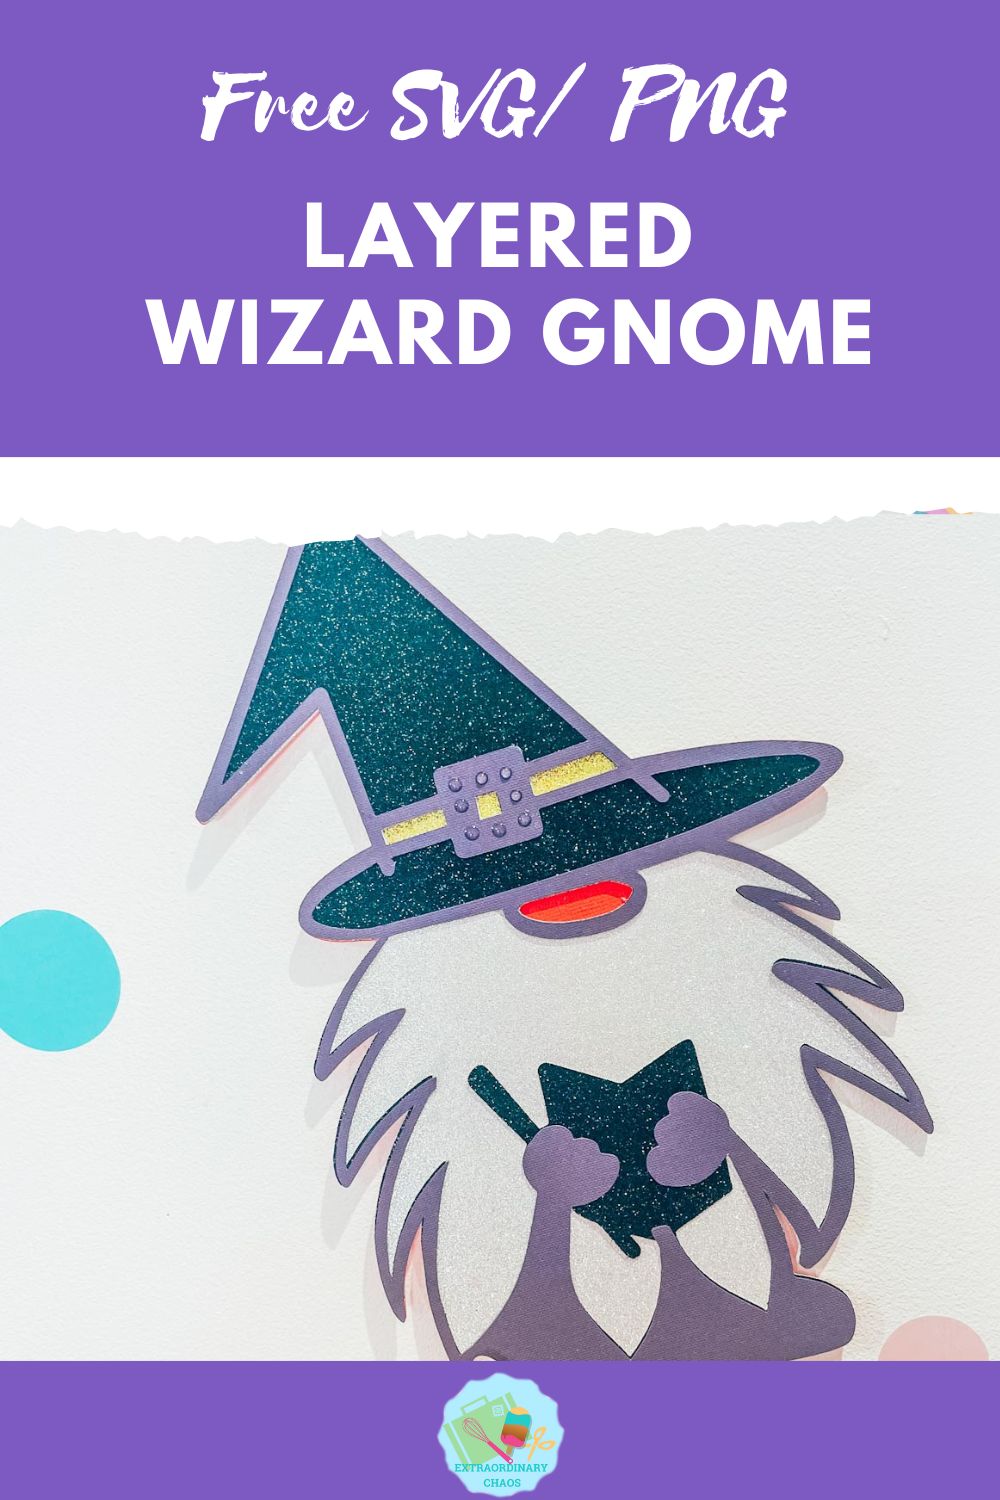 Free Layered Wizard pumpkins SVG, PNG for Cricut, Glowforge